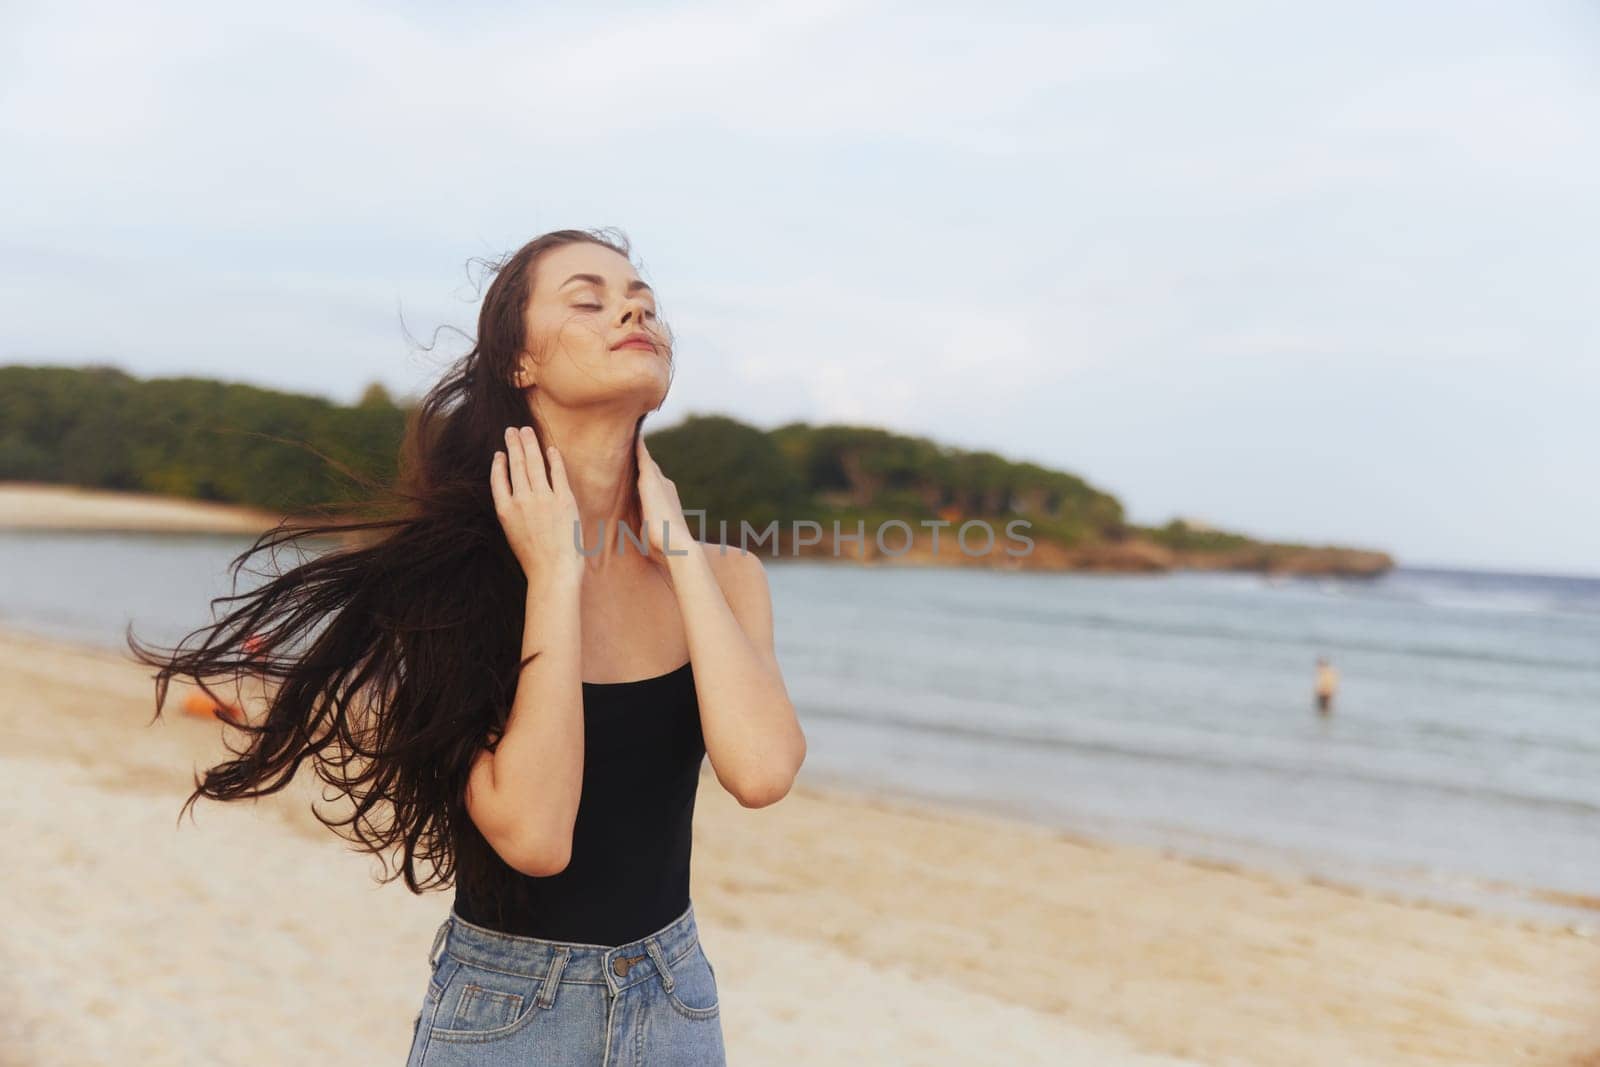 woman vacation girl sunset walk shore ocean outdoor sea summer sand freedom beach happiness lifestyle smiling carefree leisure sun smile person